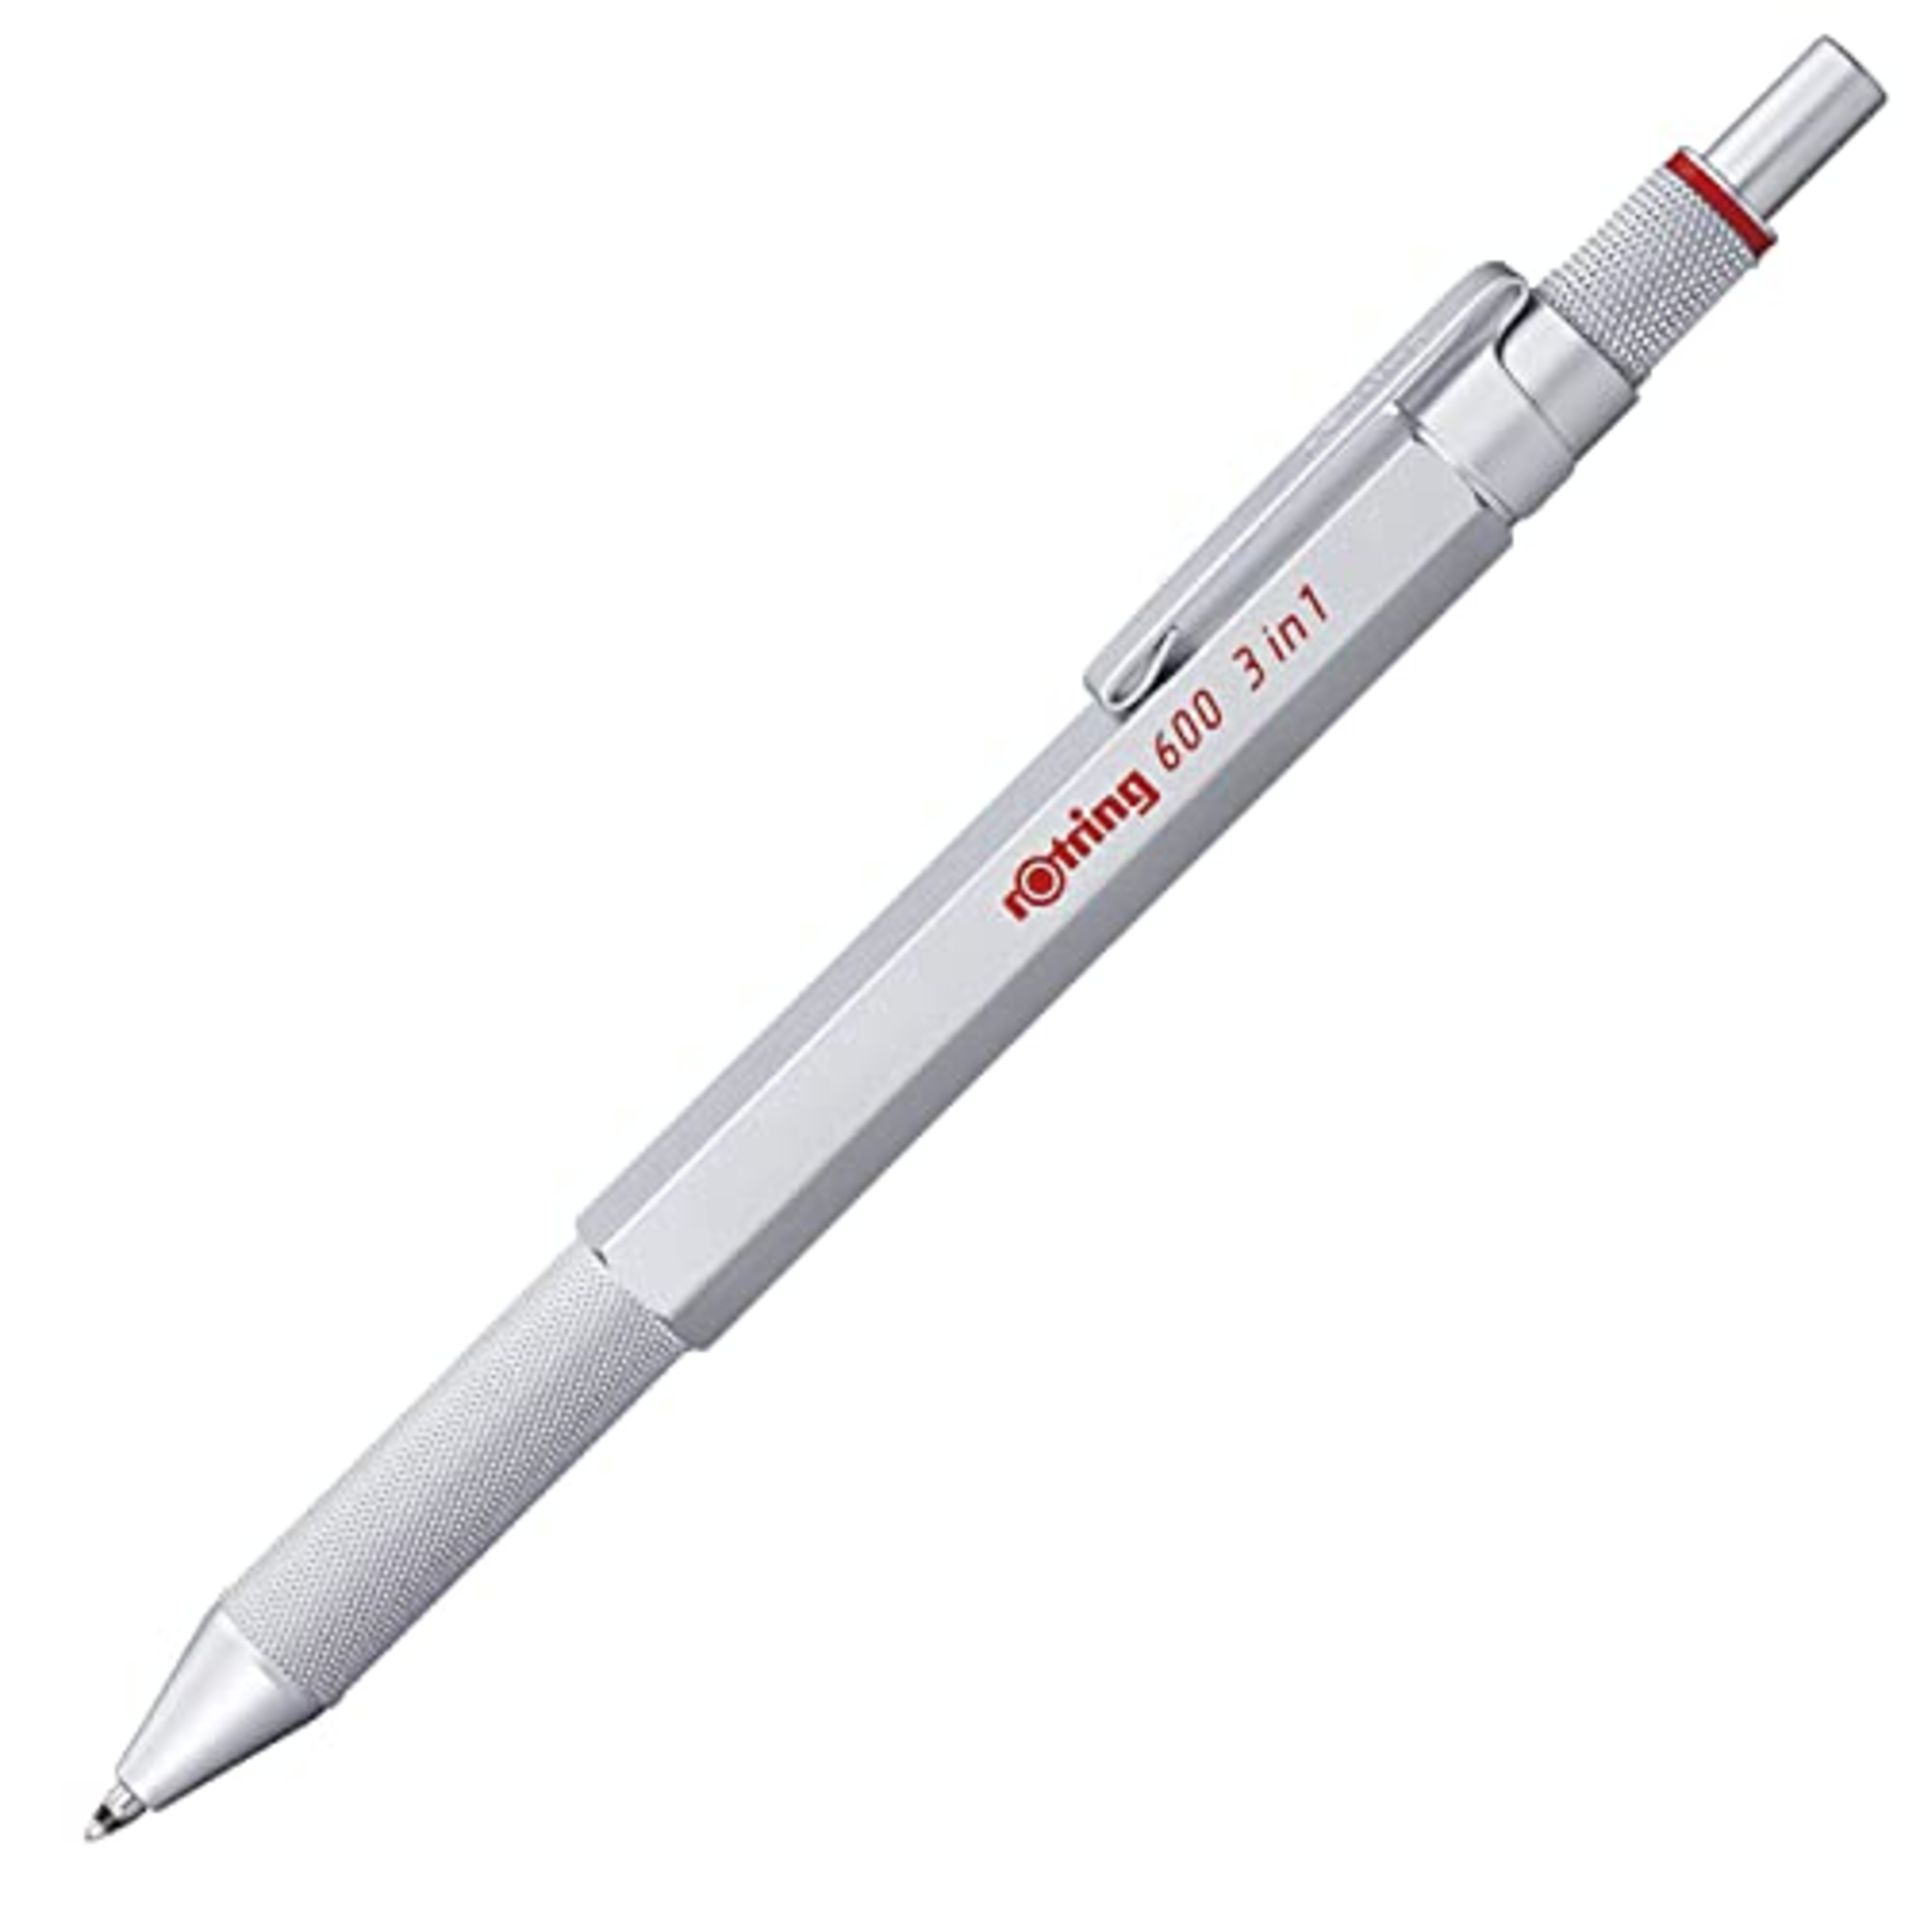 rOtring 600 Multi-color Pen and 3-in-1 Pencil | 2 fine ballpoint tips (black and red i - Image 4 of 6